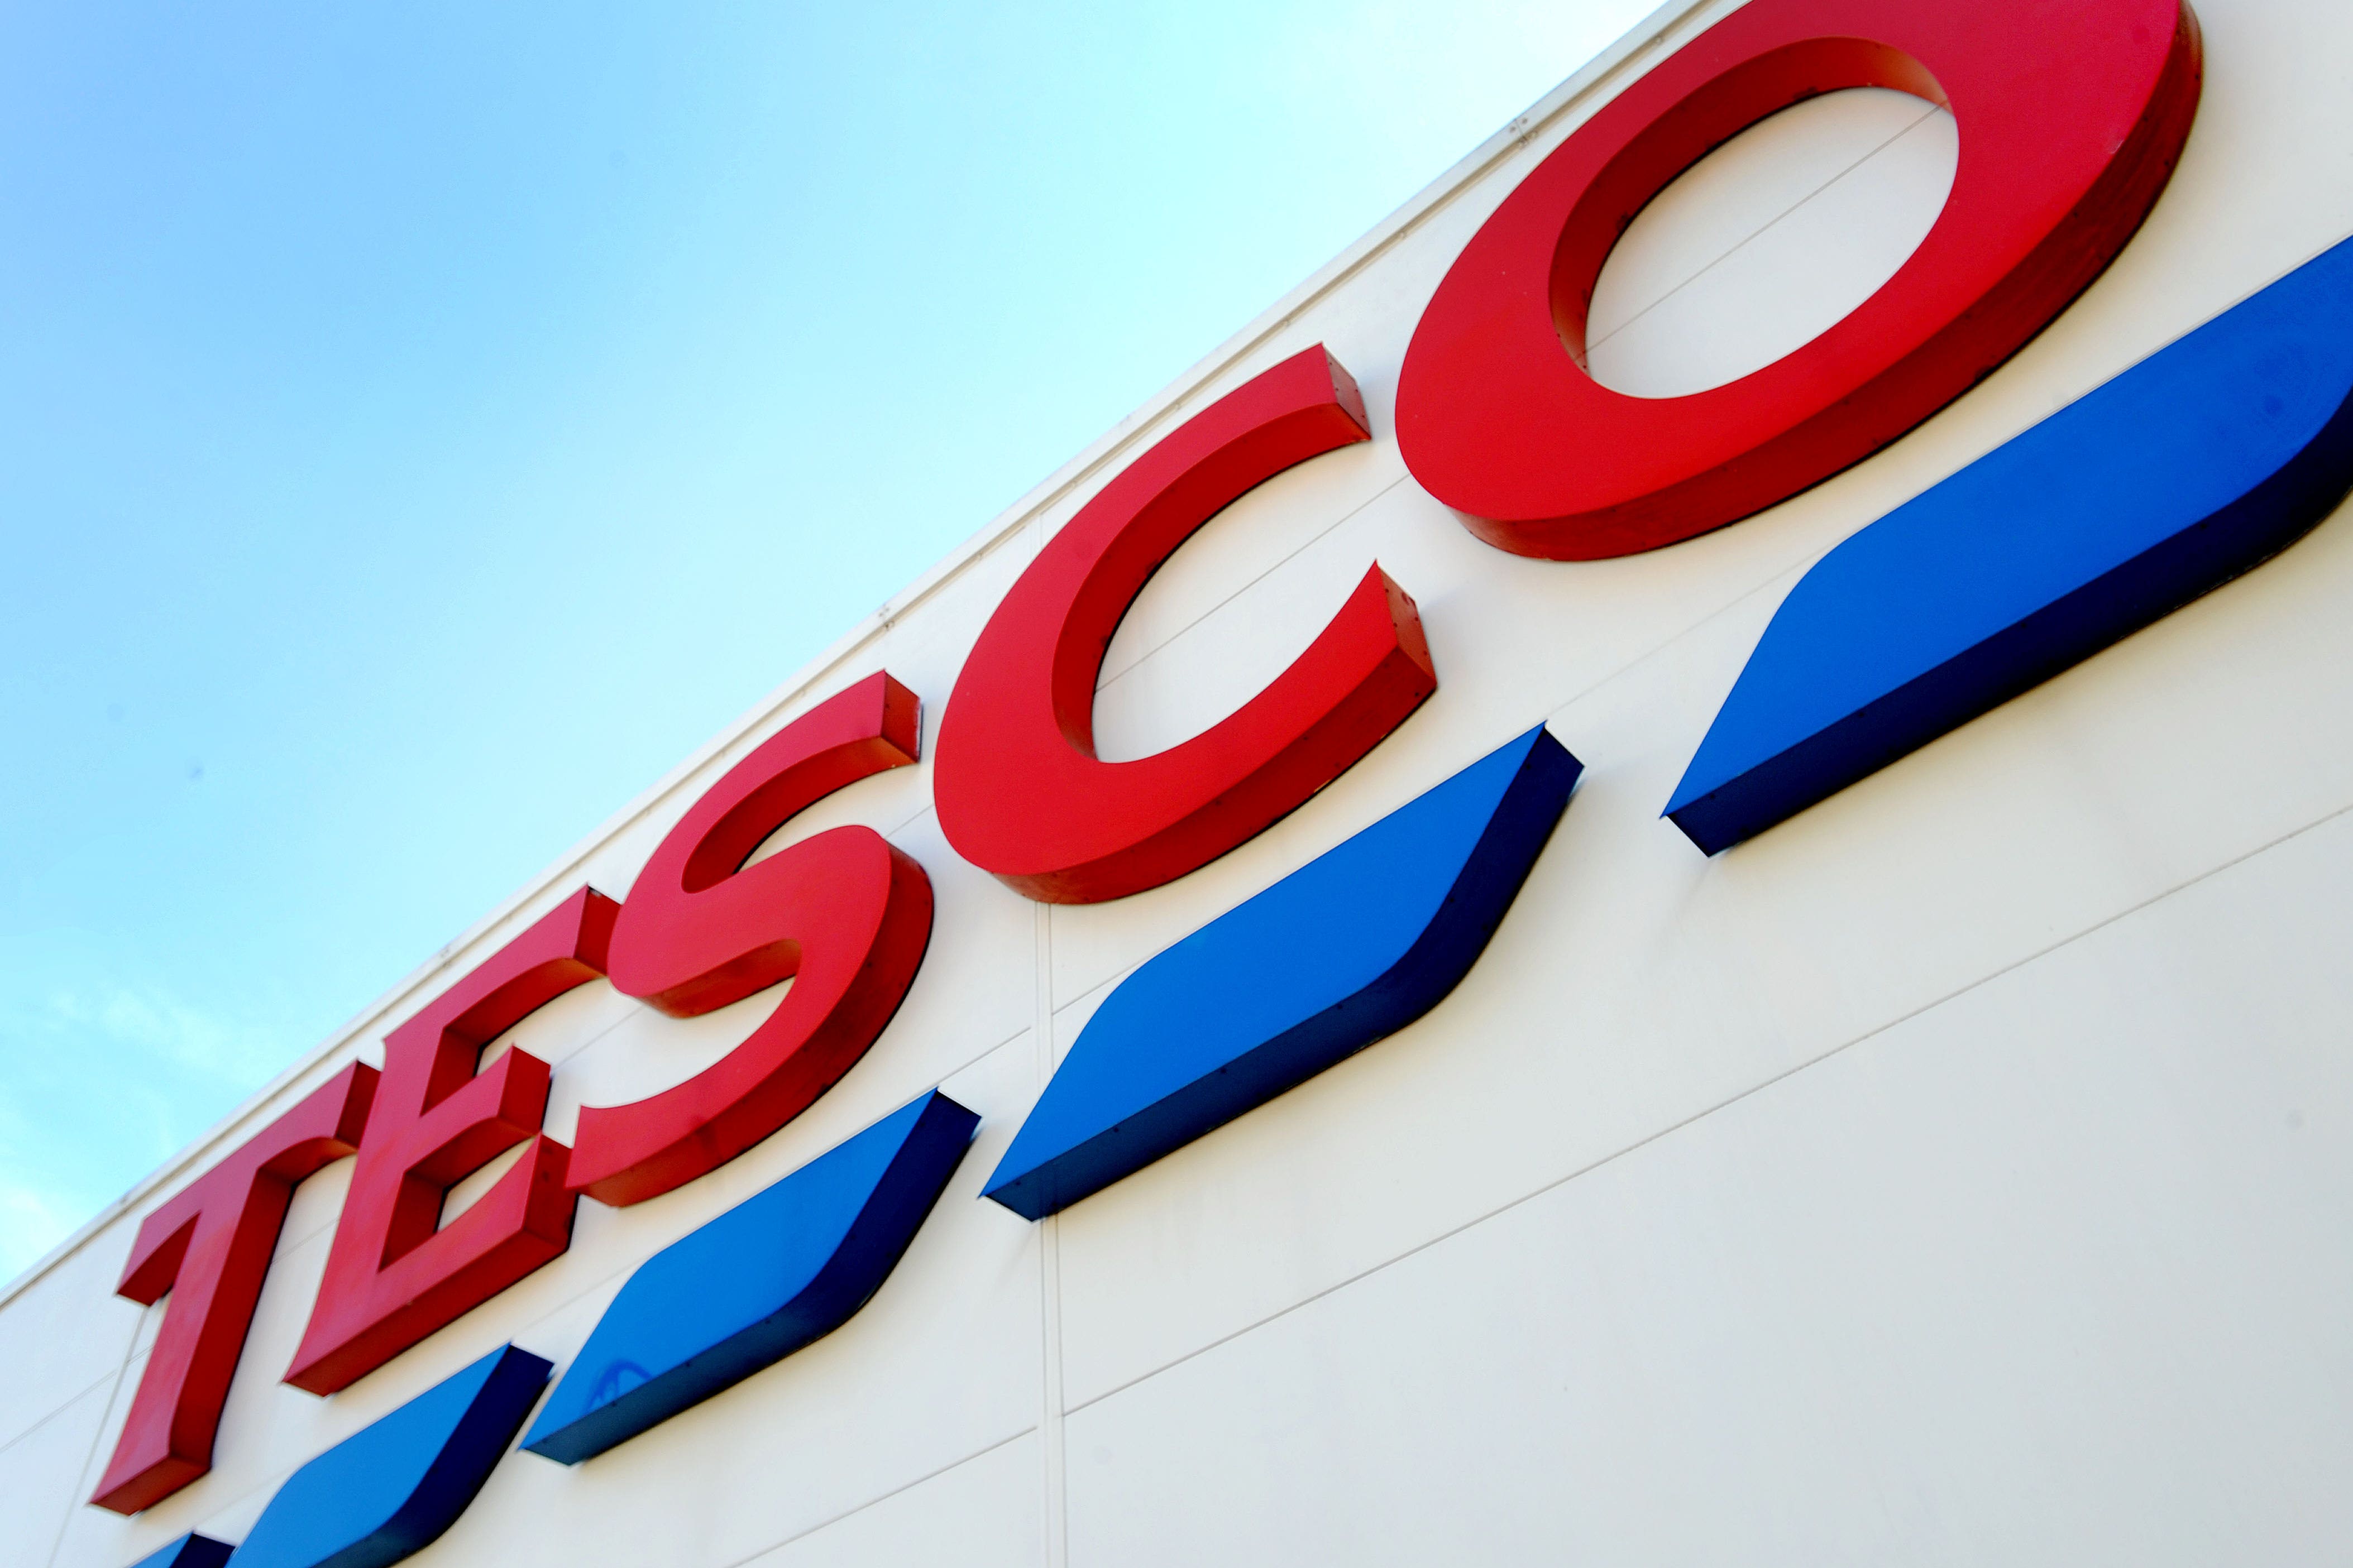 Tesco has rolled out changes allowing all its staff to request flexible working from their first day (PA)